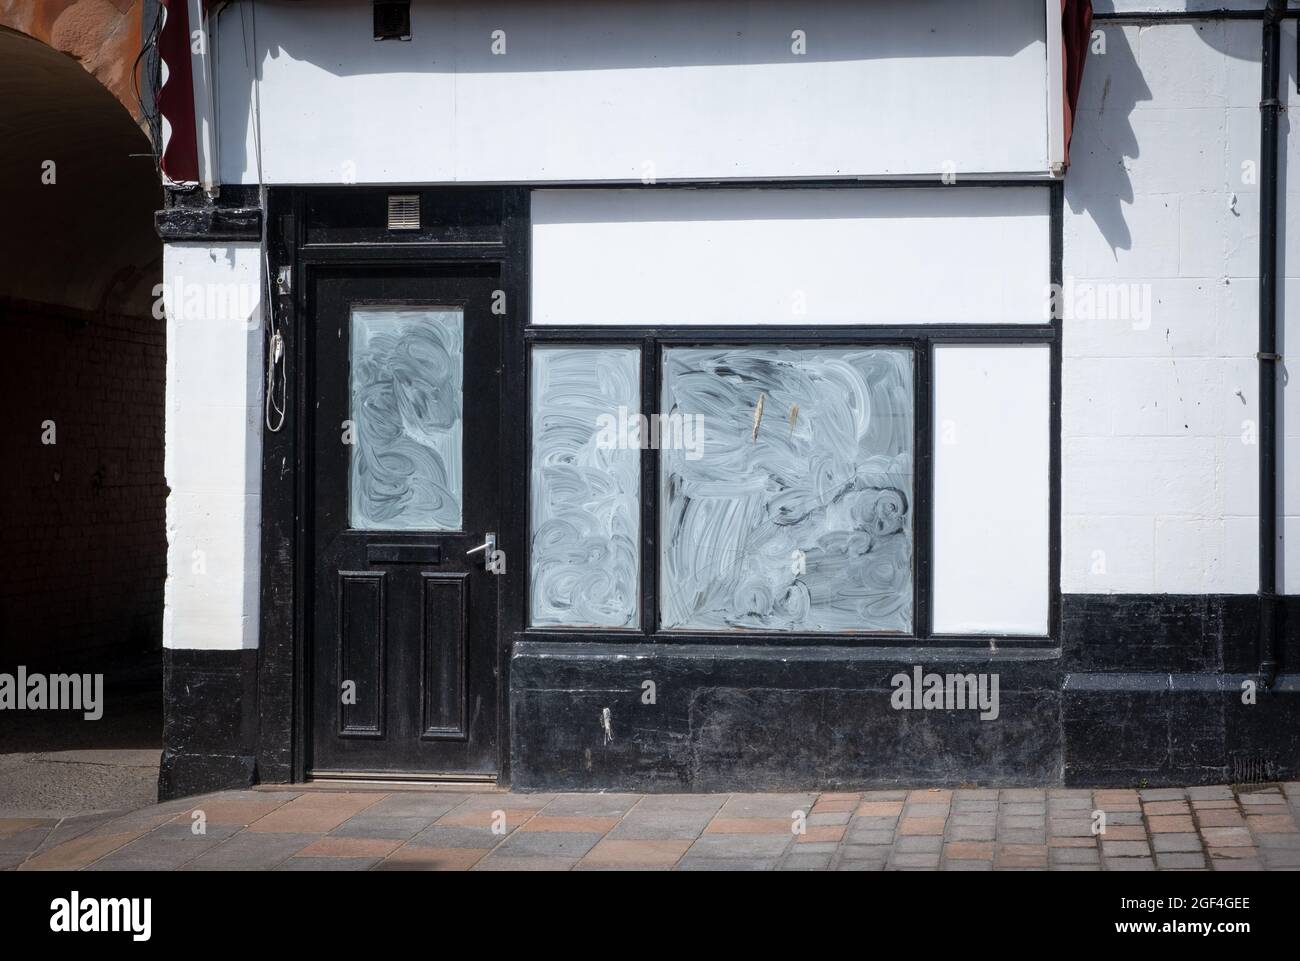 Empty shop in Dumfries, Scotland, evidence of economic downturn in the area, where small businesses struggle to survive. Stock Photo